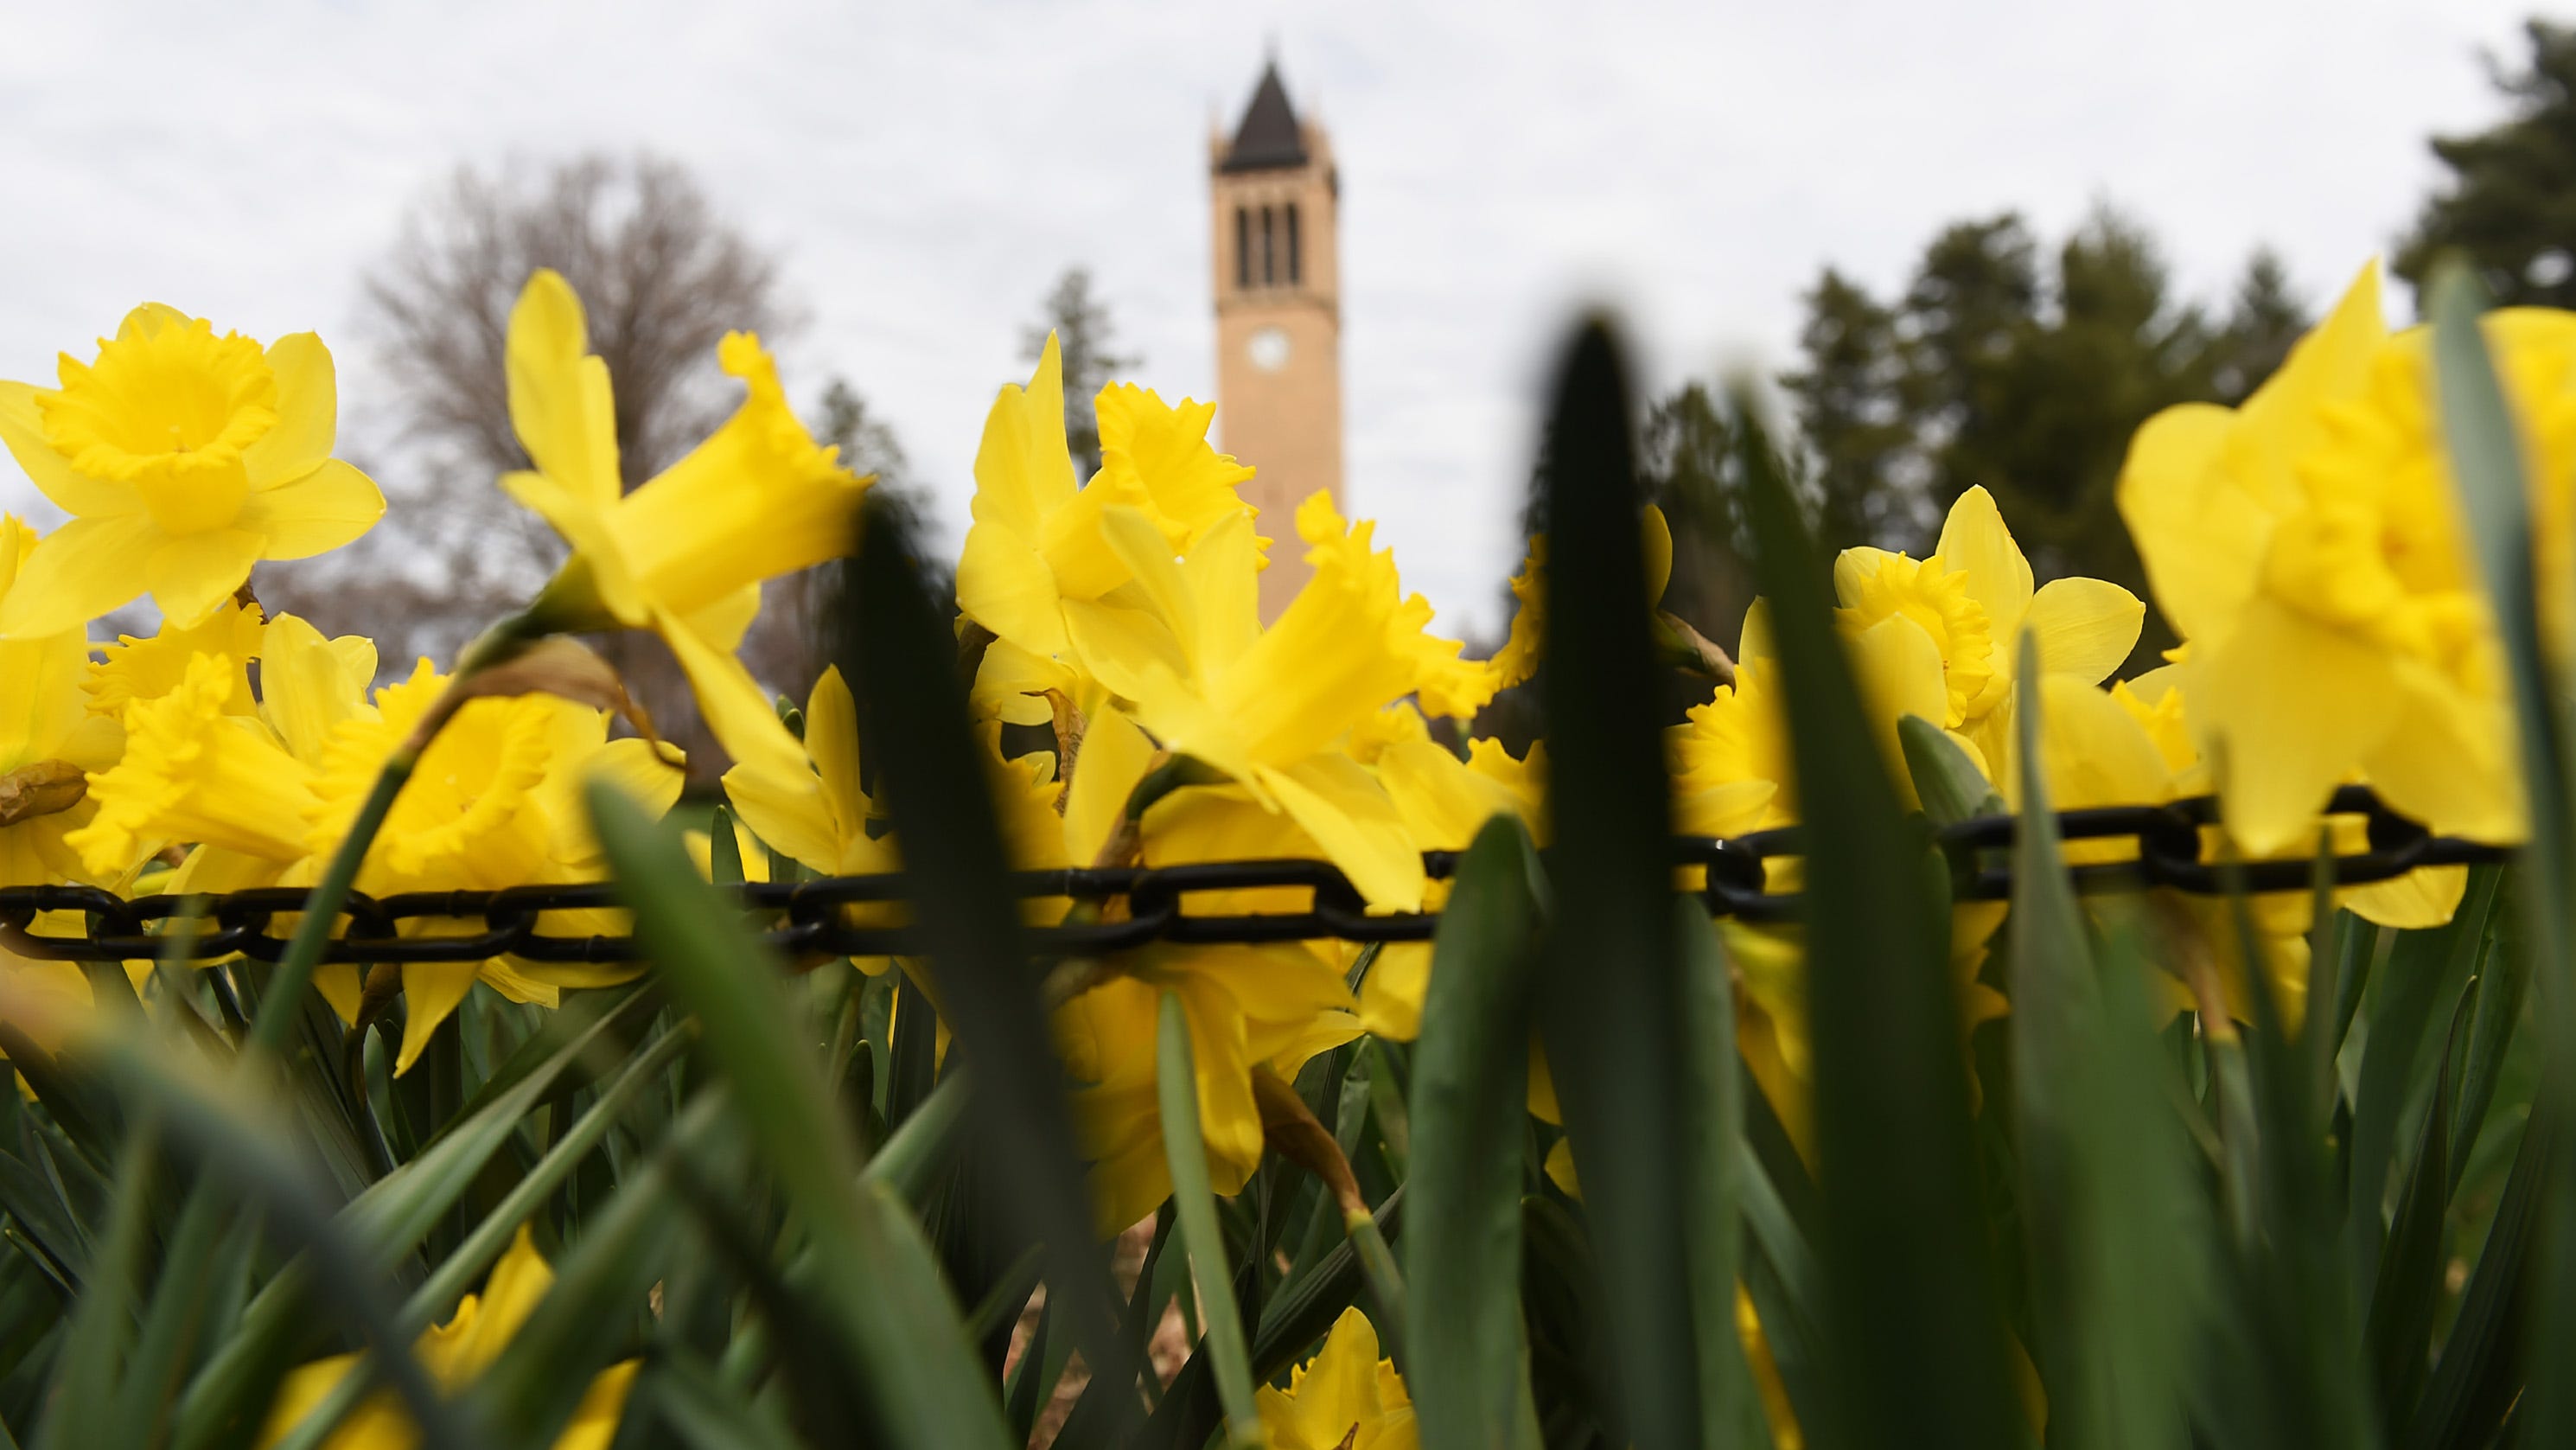 Where to see spring flowers blooming at Iowa State University